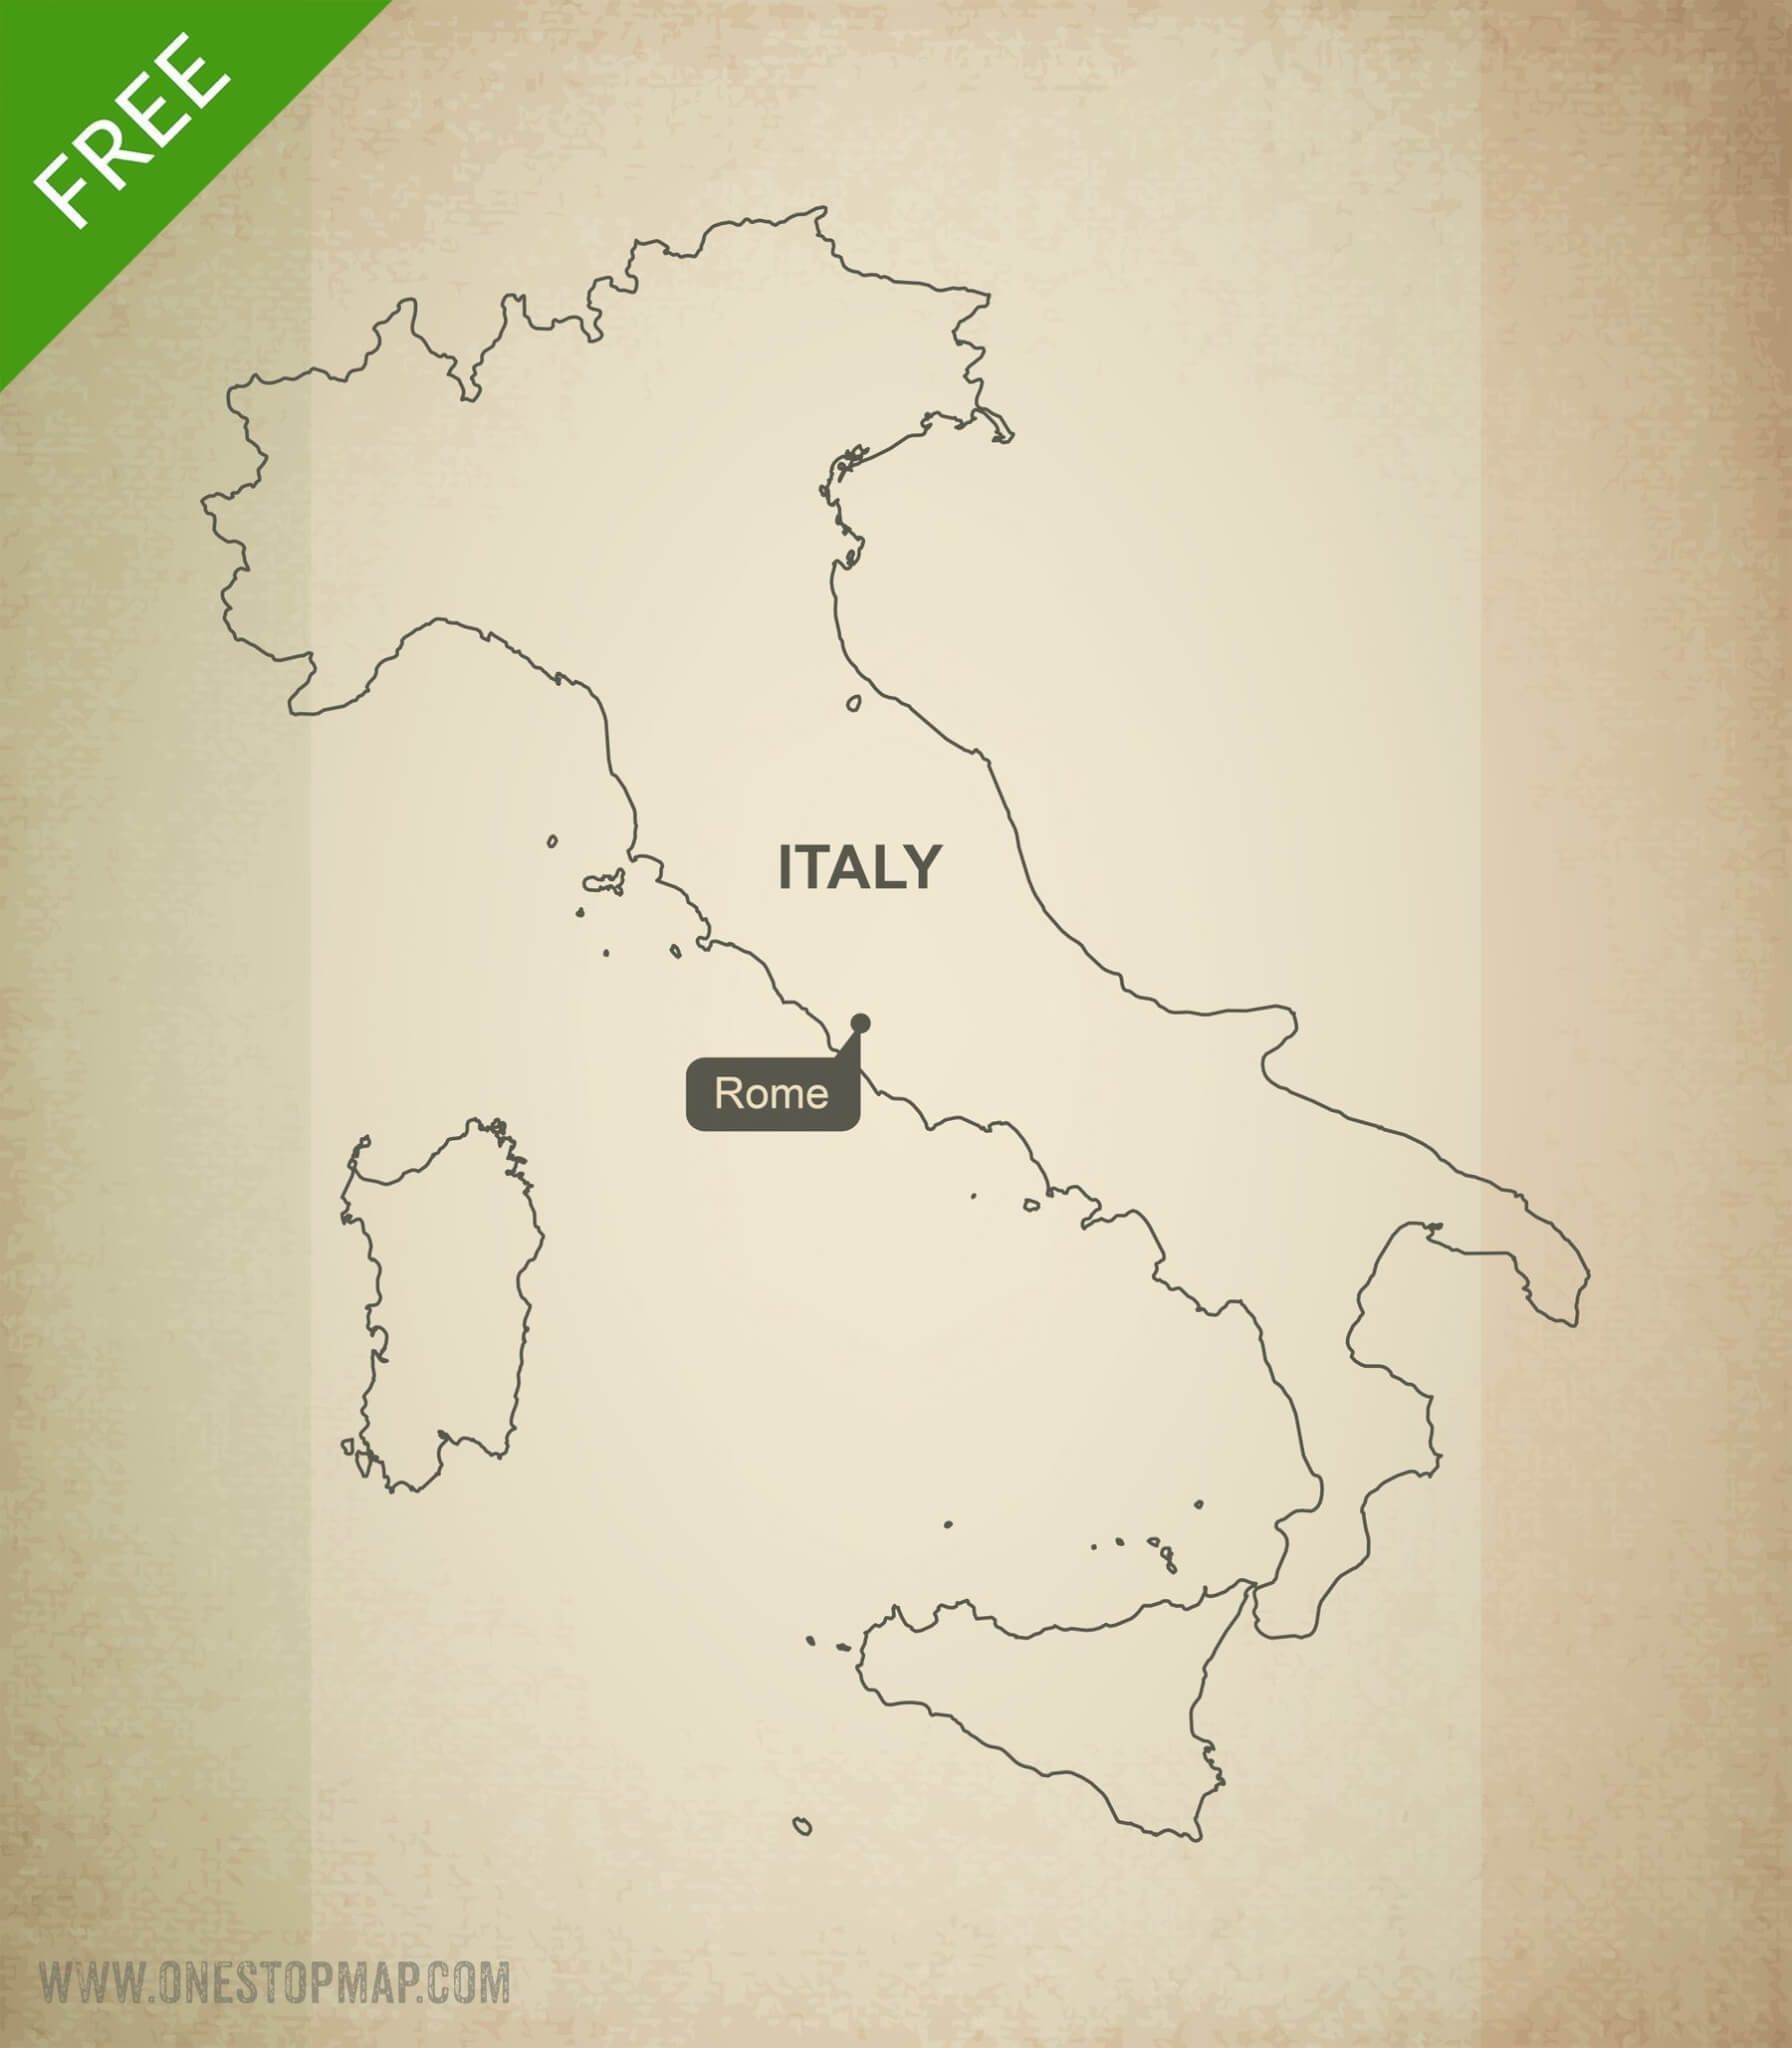 Vector Italy Map Outline Map Of Italy Royalty Free Vector Image